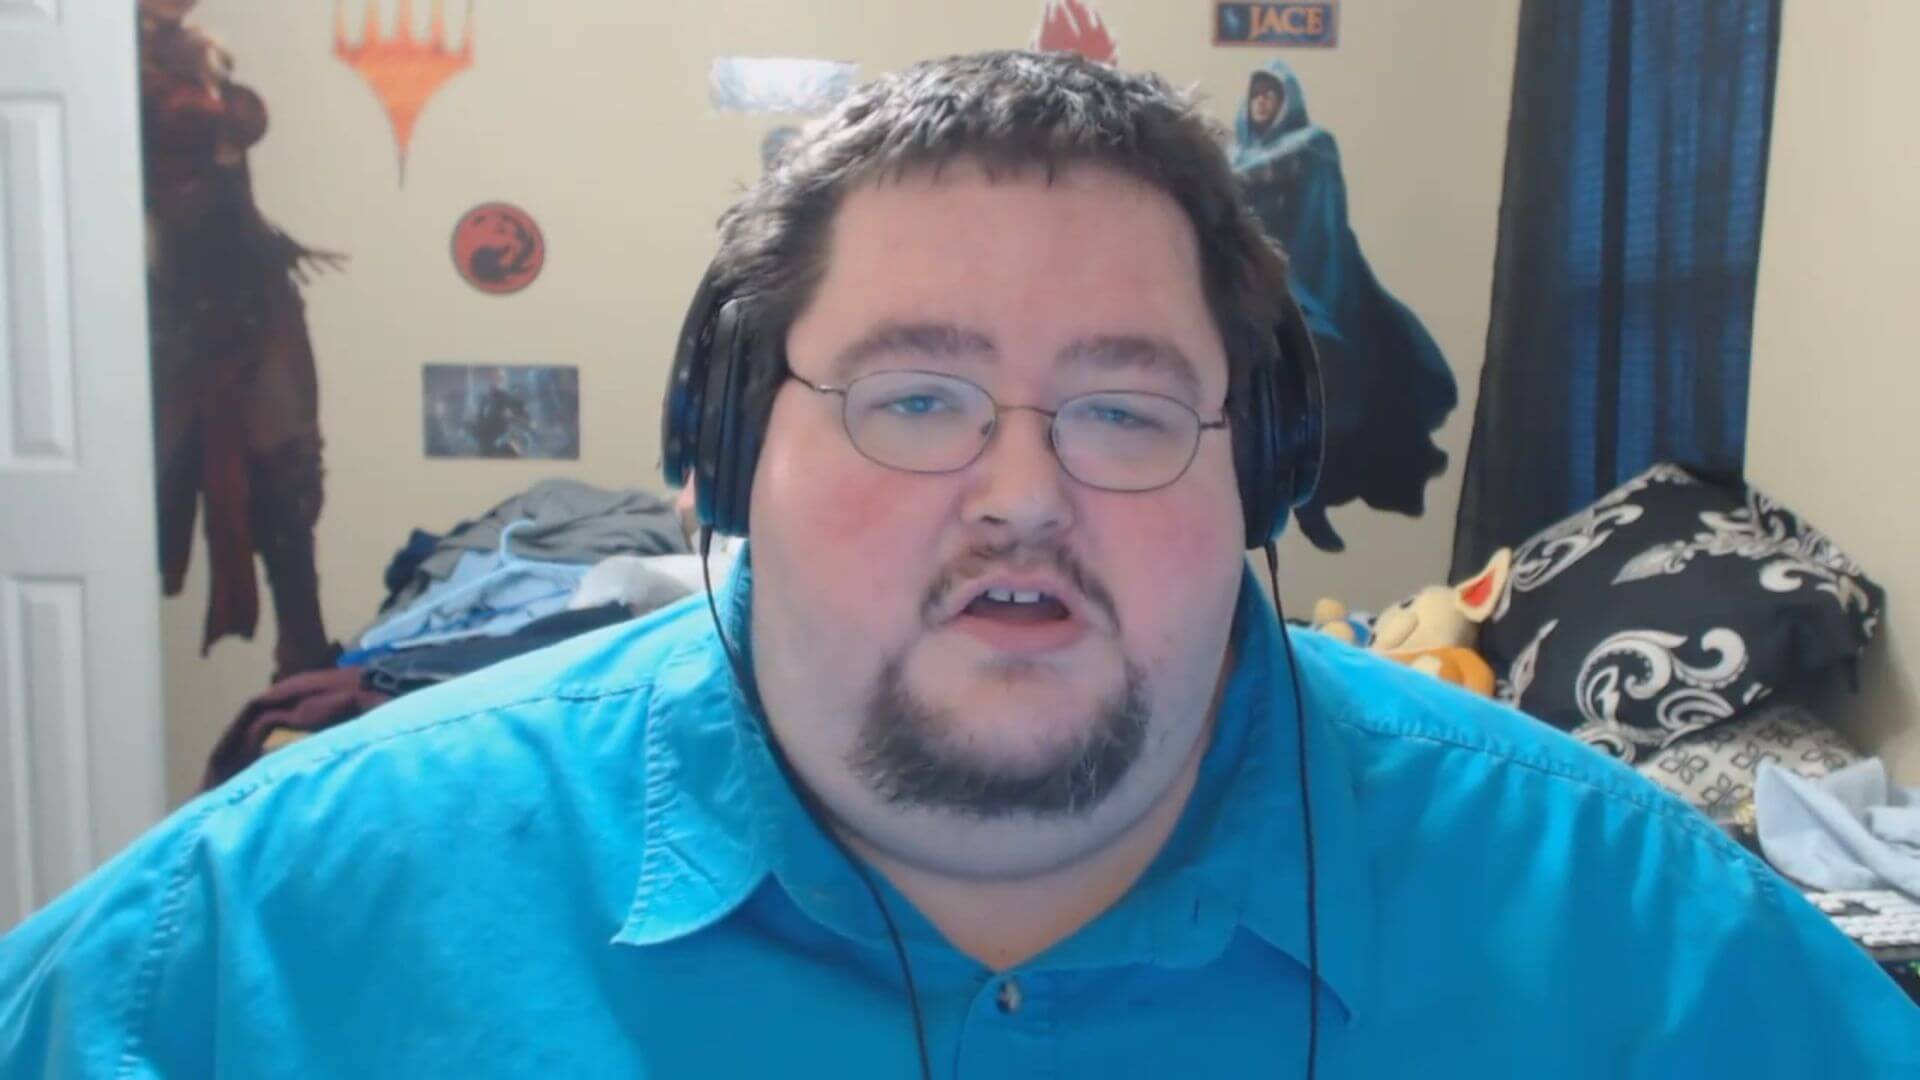 Youtube Personality Boogie2988 Was Hacked